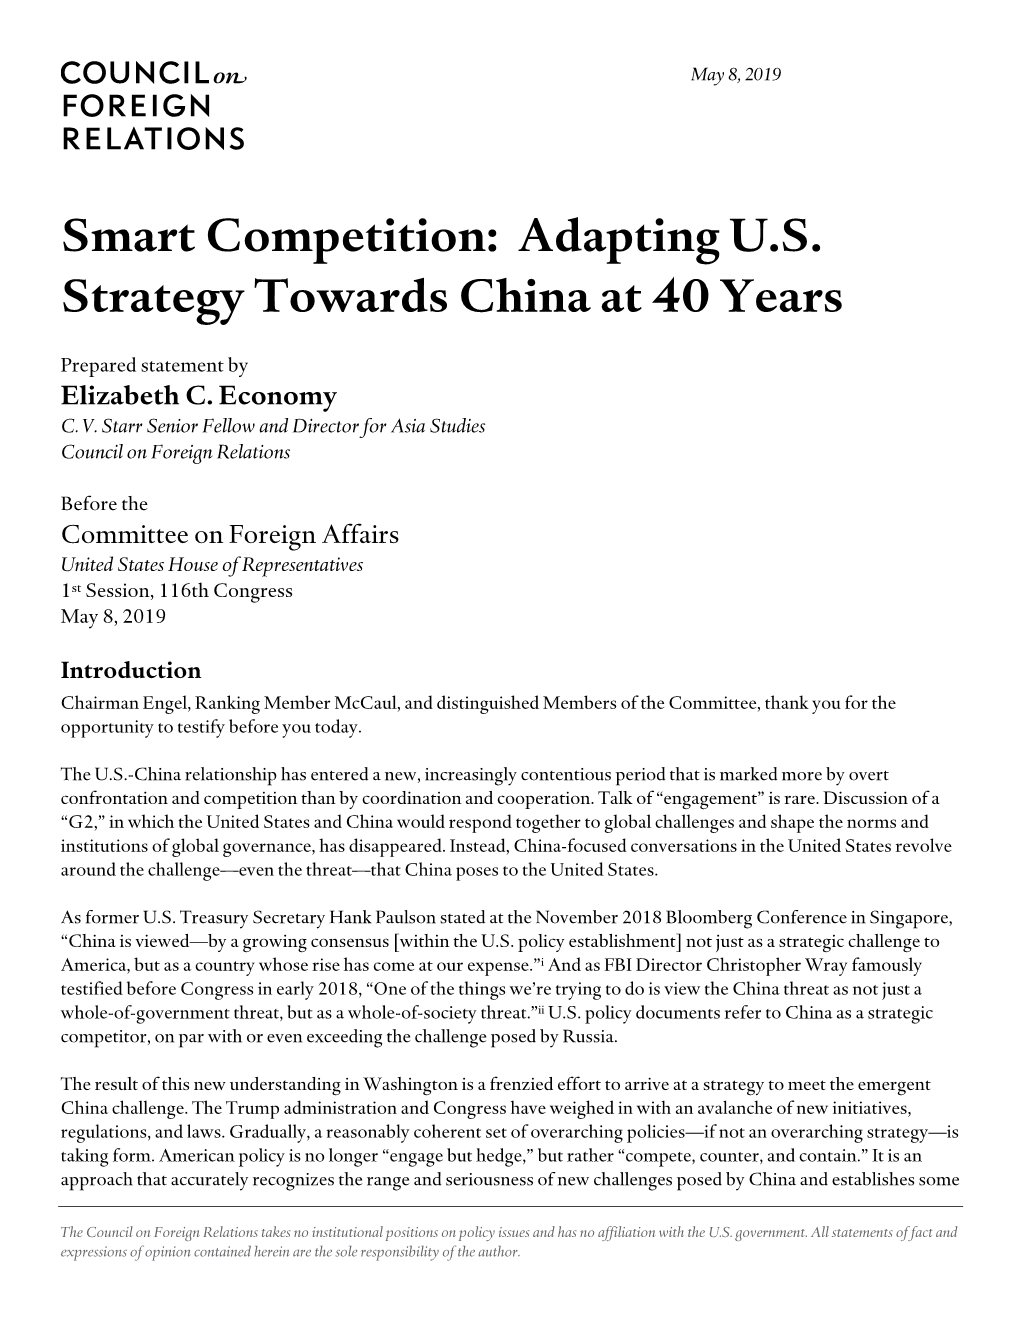 Smart Competition: Adapting U.S. Strategy Towards China at 40 Years